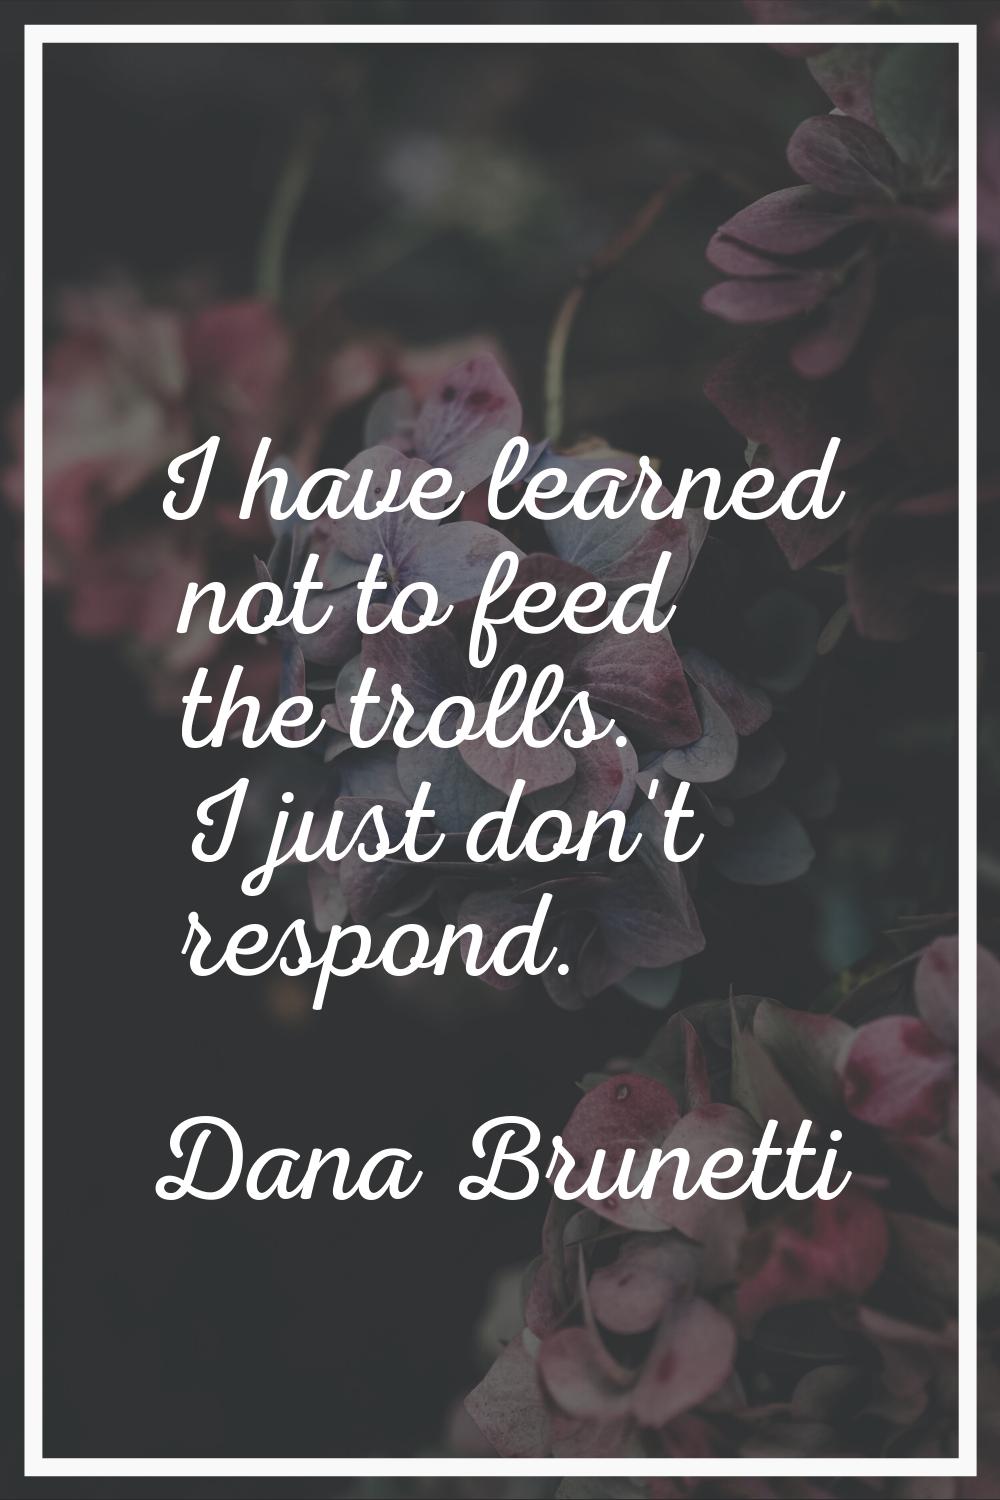 I have learned not to feed the trolls. I just don't respond.